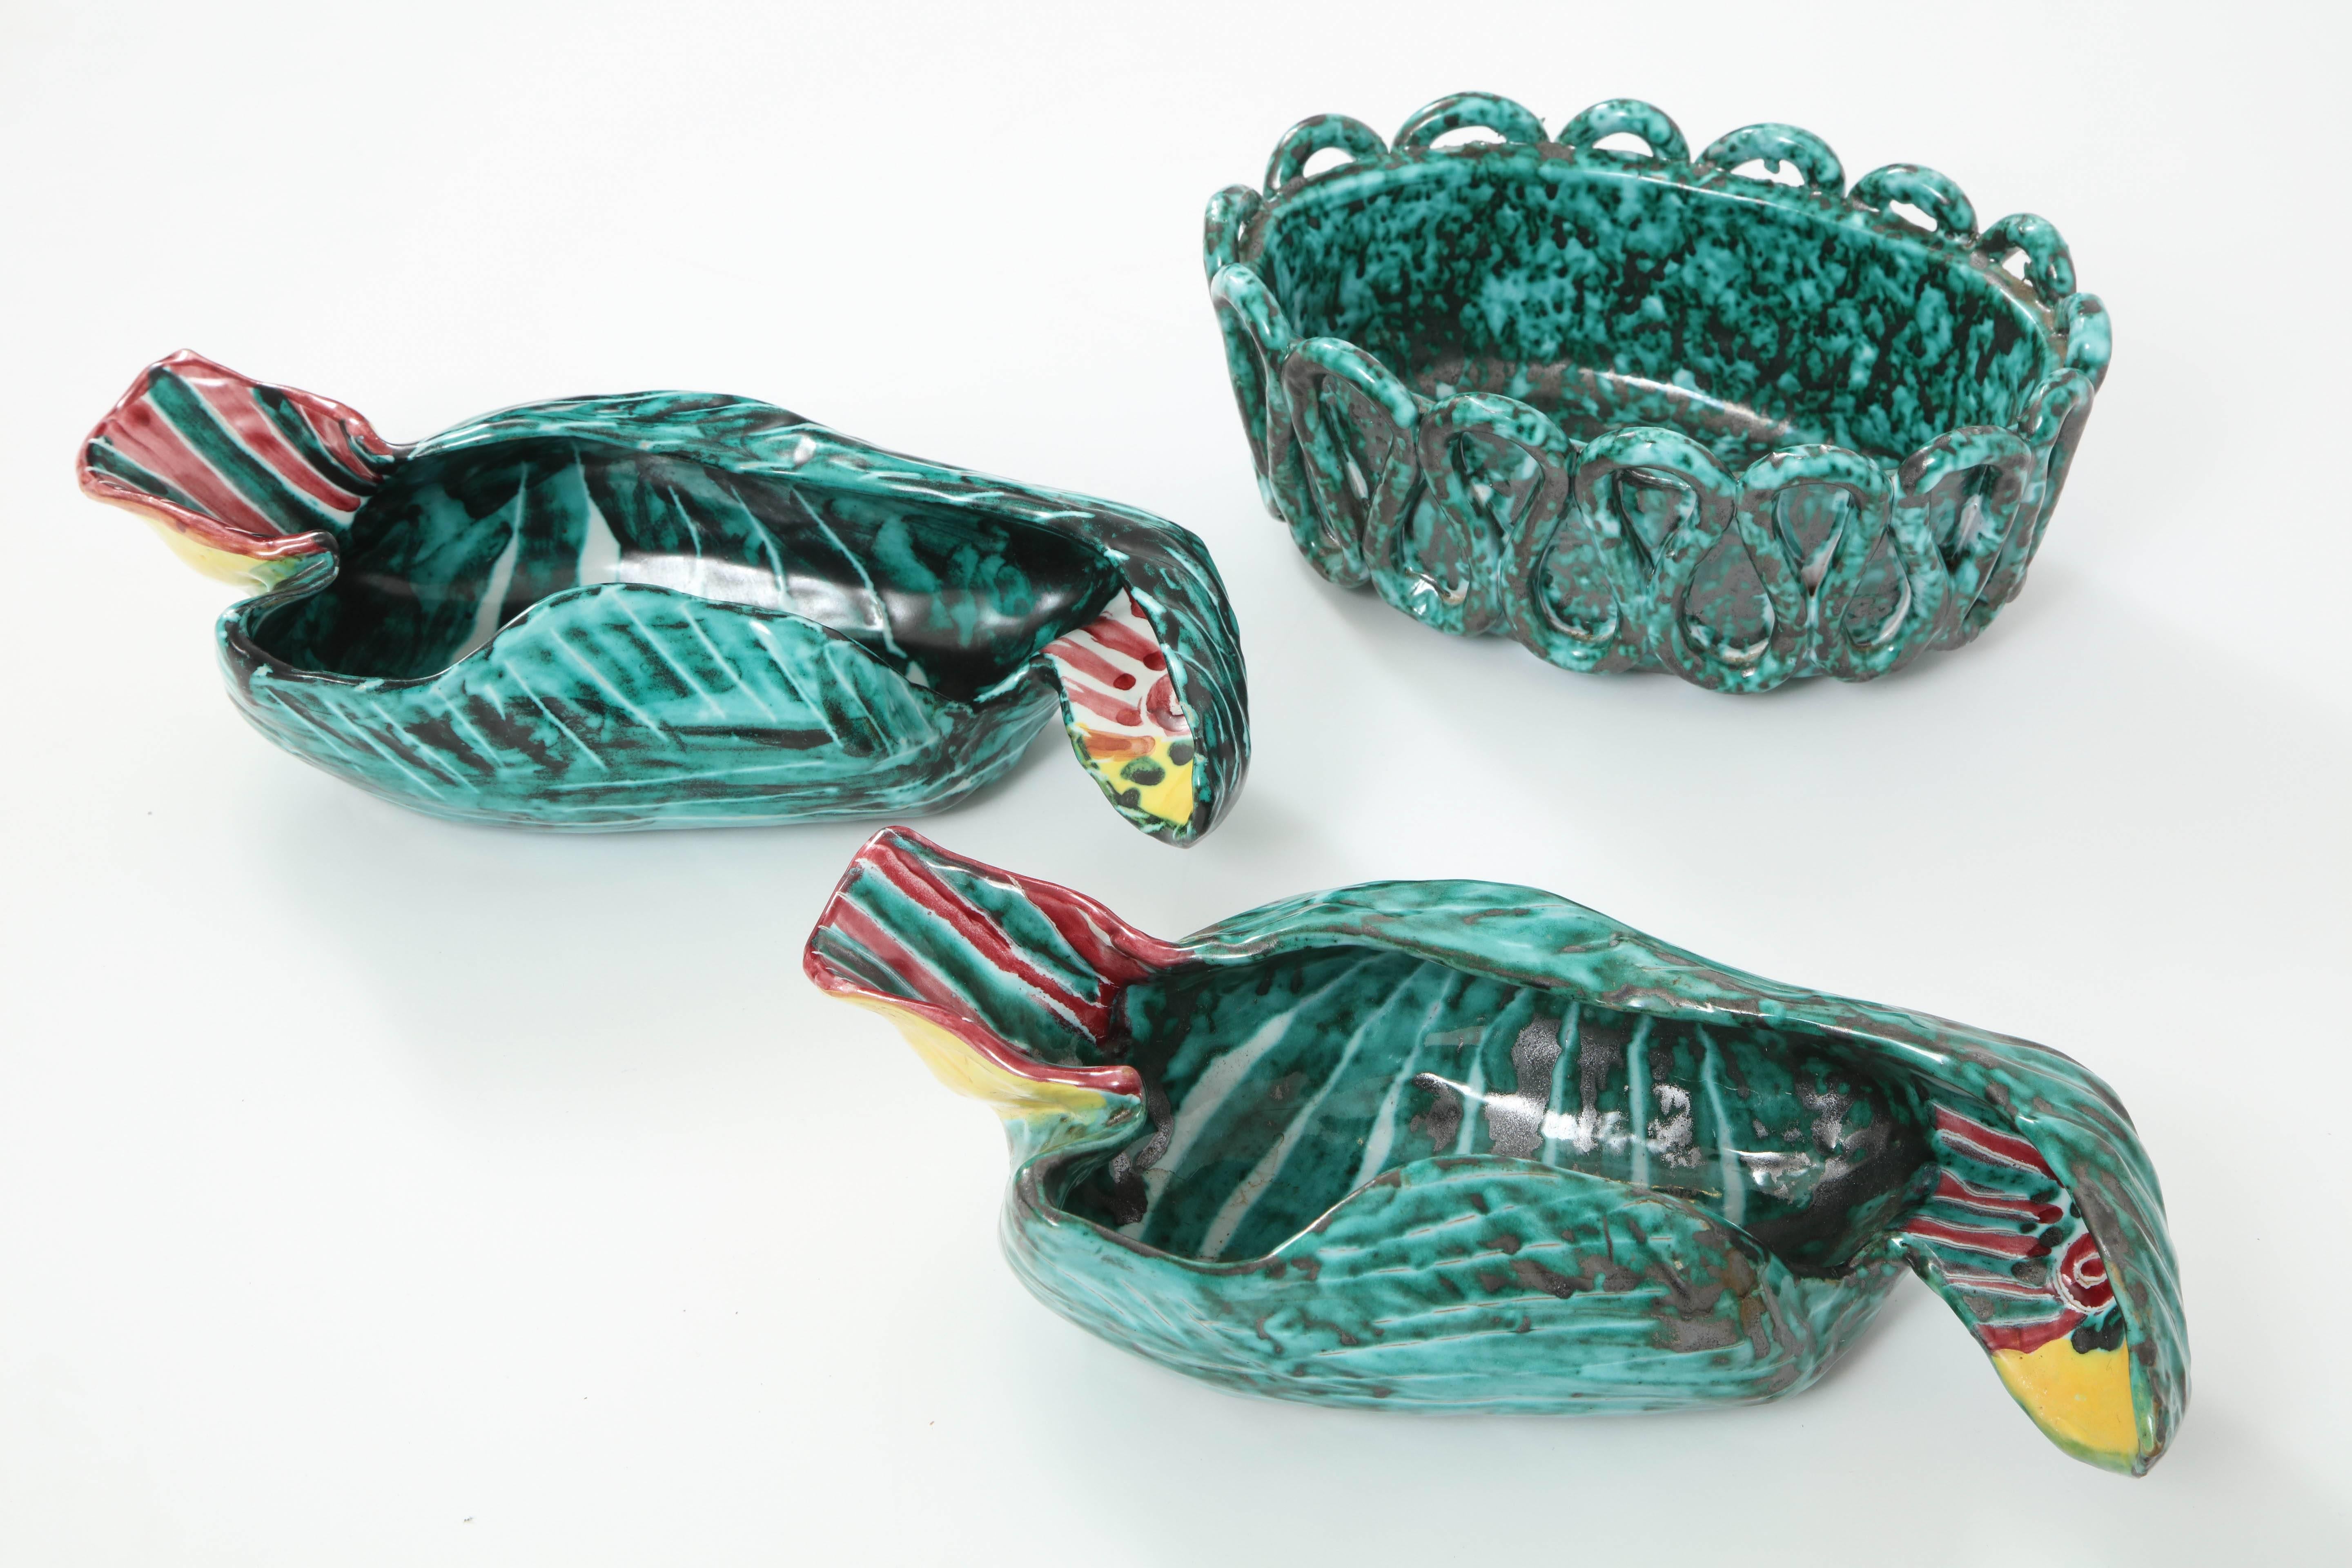 Fun pair of 1950s Italian ceramic hand painted parrots along with a Classic weave oval ceramic bowl. Period 1950s colors of aqua, green, maroon, and yellow with a nice artistic feel to them! Parrots have eyes at both ends! So one parrot can face one